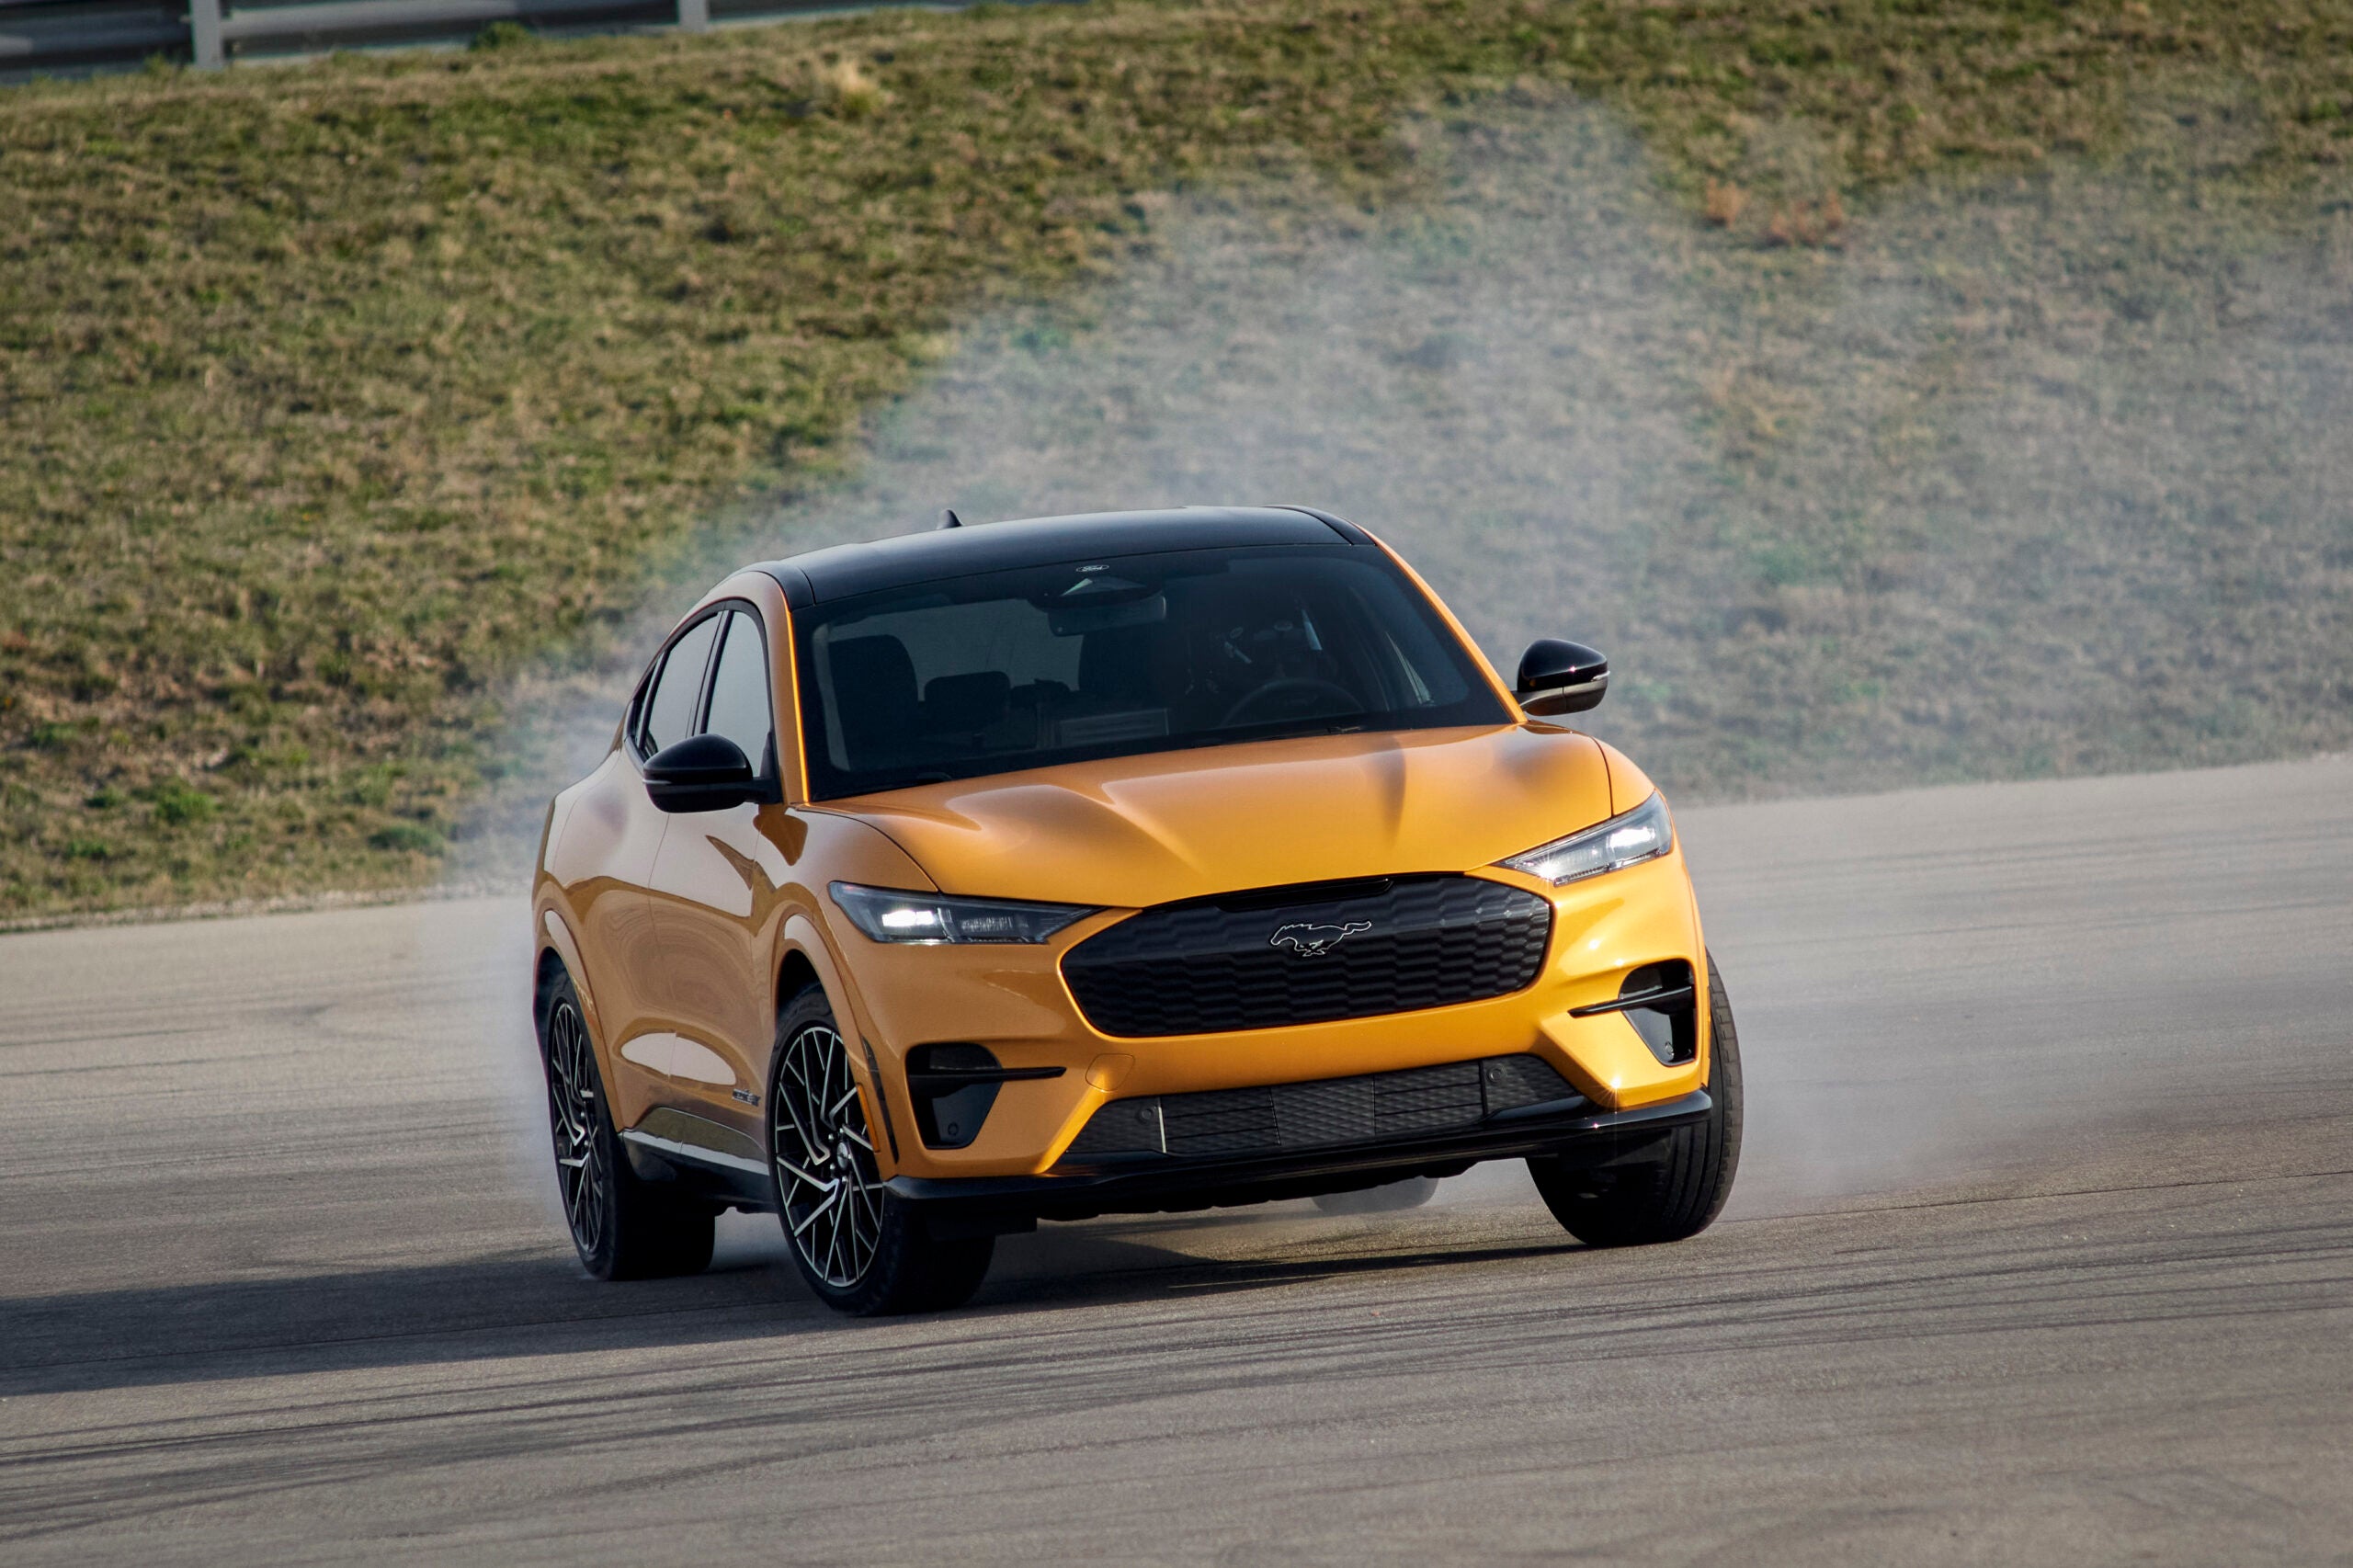 Ford Might Make a Burnout Mode for Its EVs